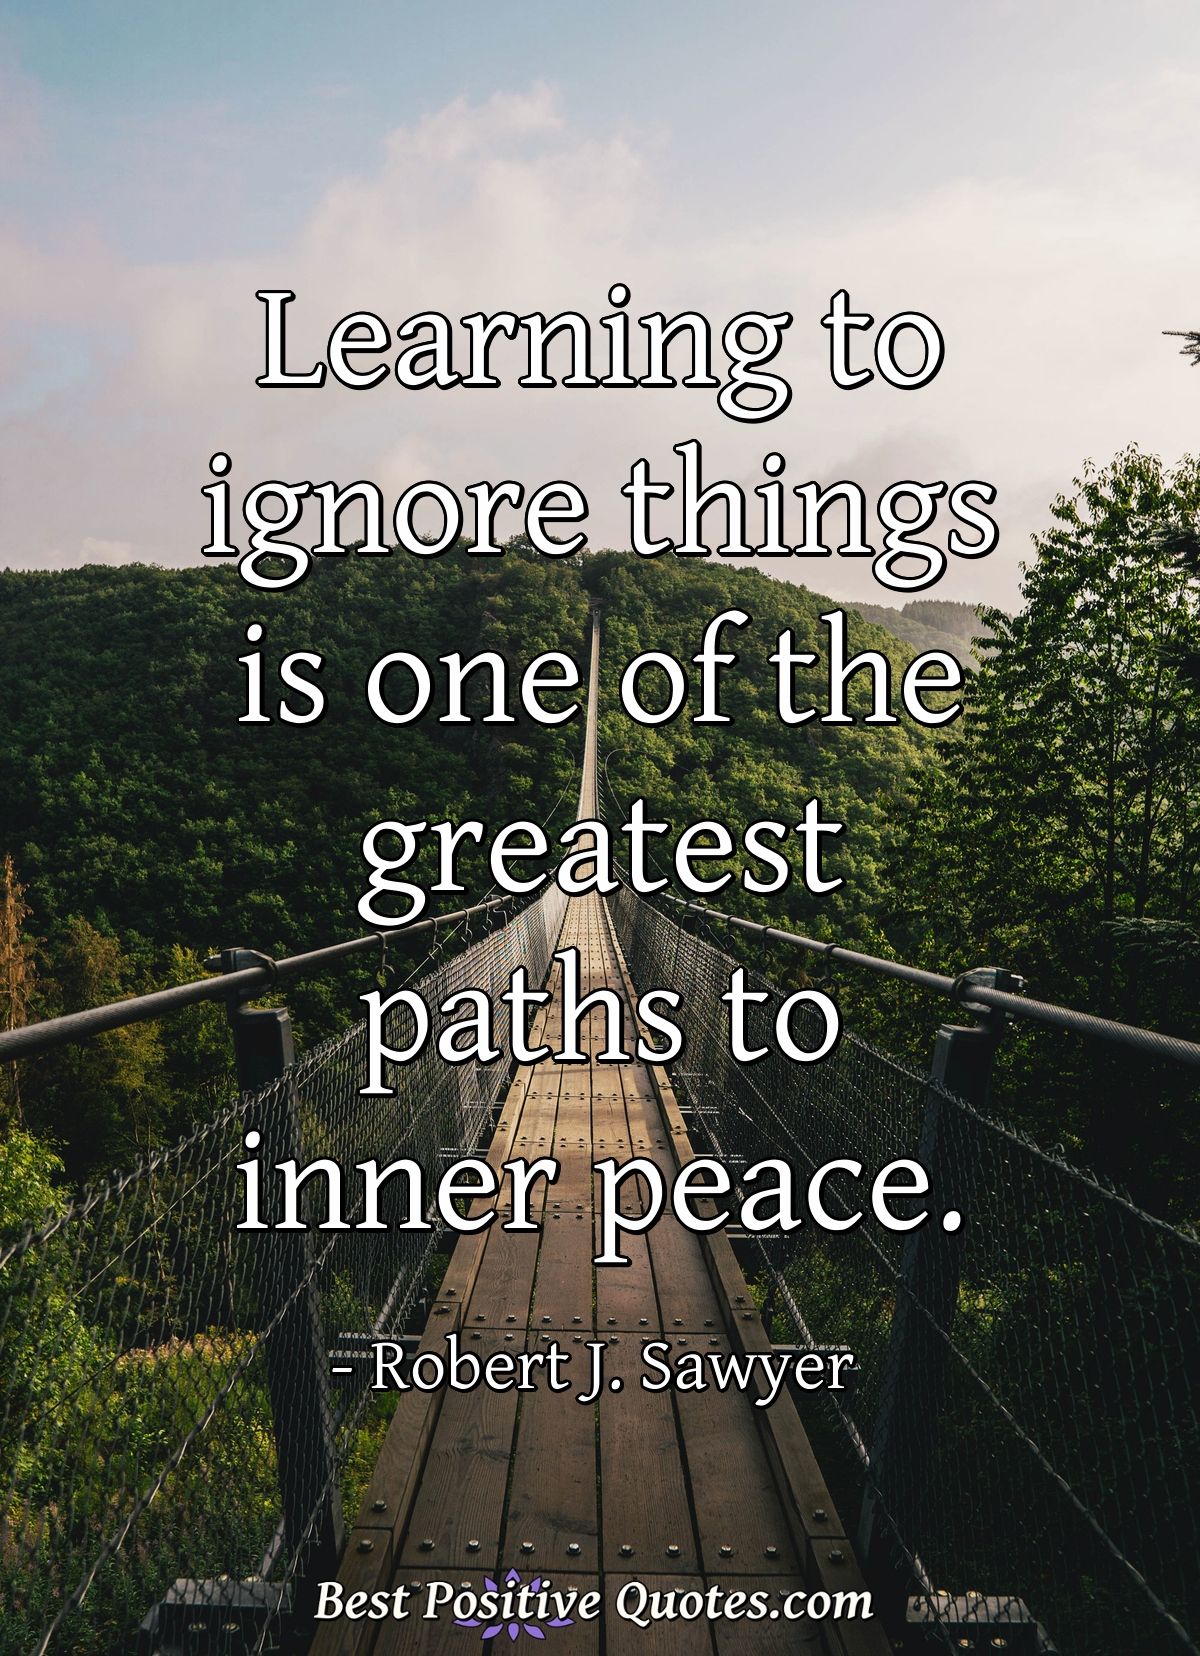 Learning to ignore things is one of the greatest paths to inner peace. - Robert J. Sawyer